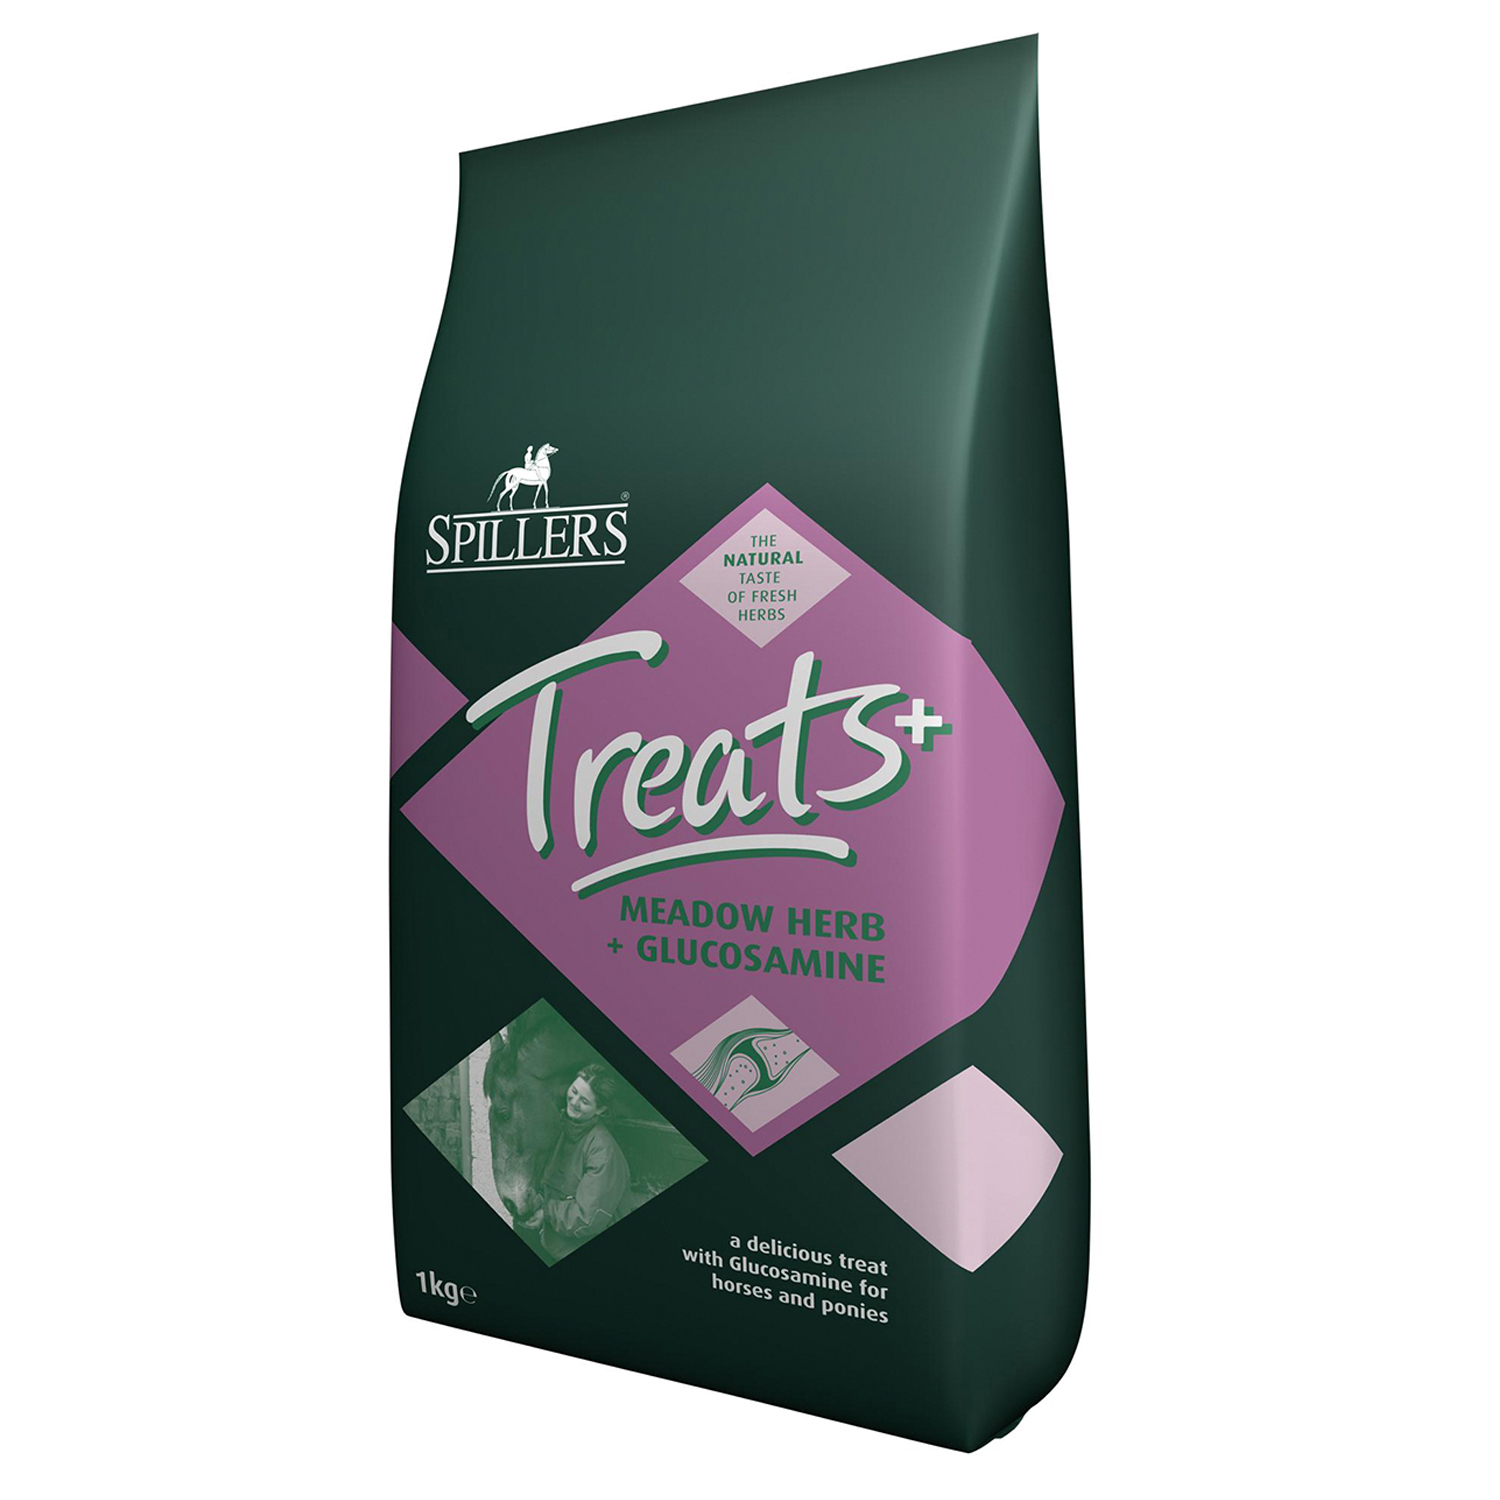 SPILLERS MEADOW HERB TREATS + GLUCOSAMINE 8 X 1 KG 1 KG X 8 PACK